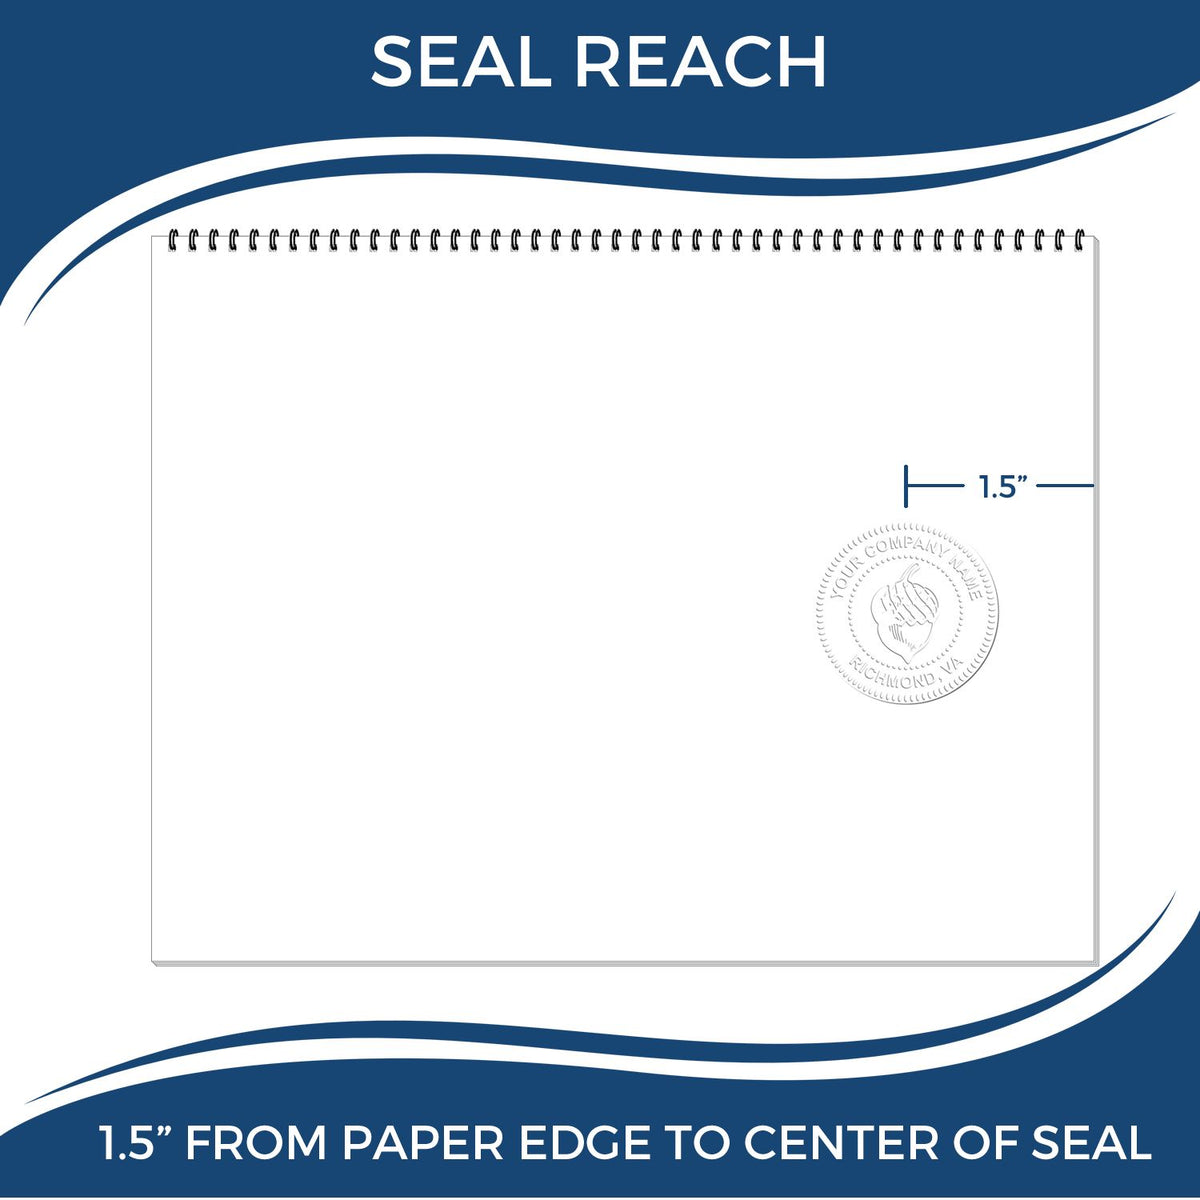 An infographic showing the seal reach which is represented by a ruler and a miniature seal image of the Gift Texas Engineer Seal